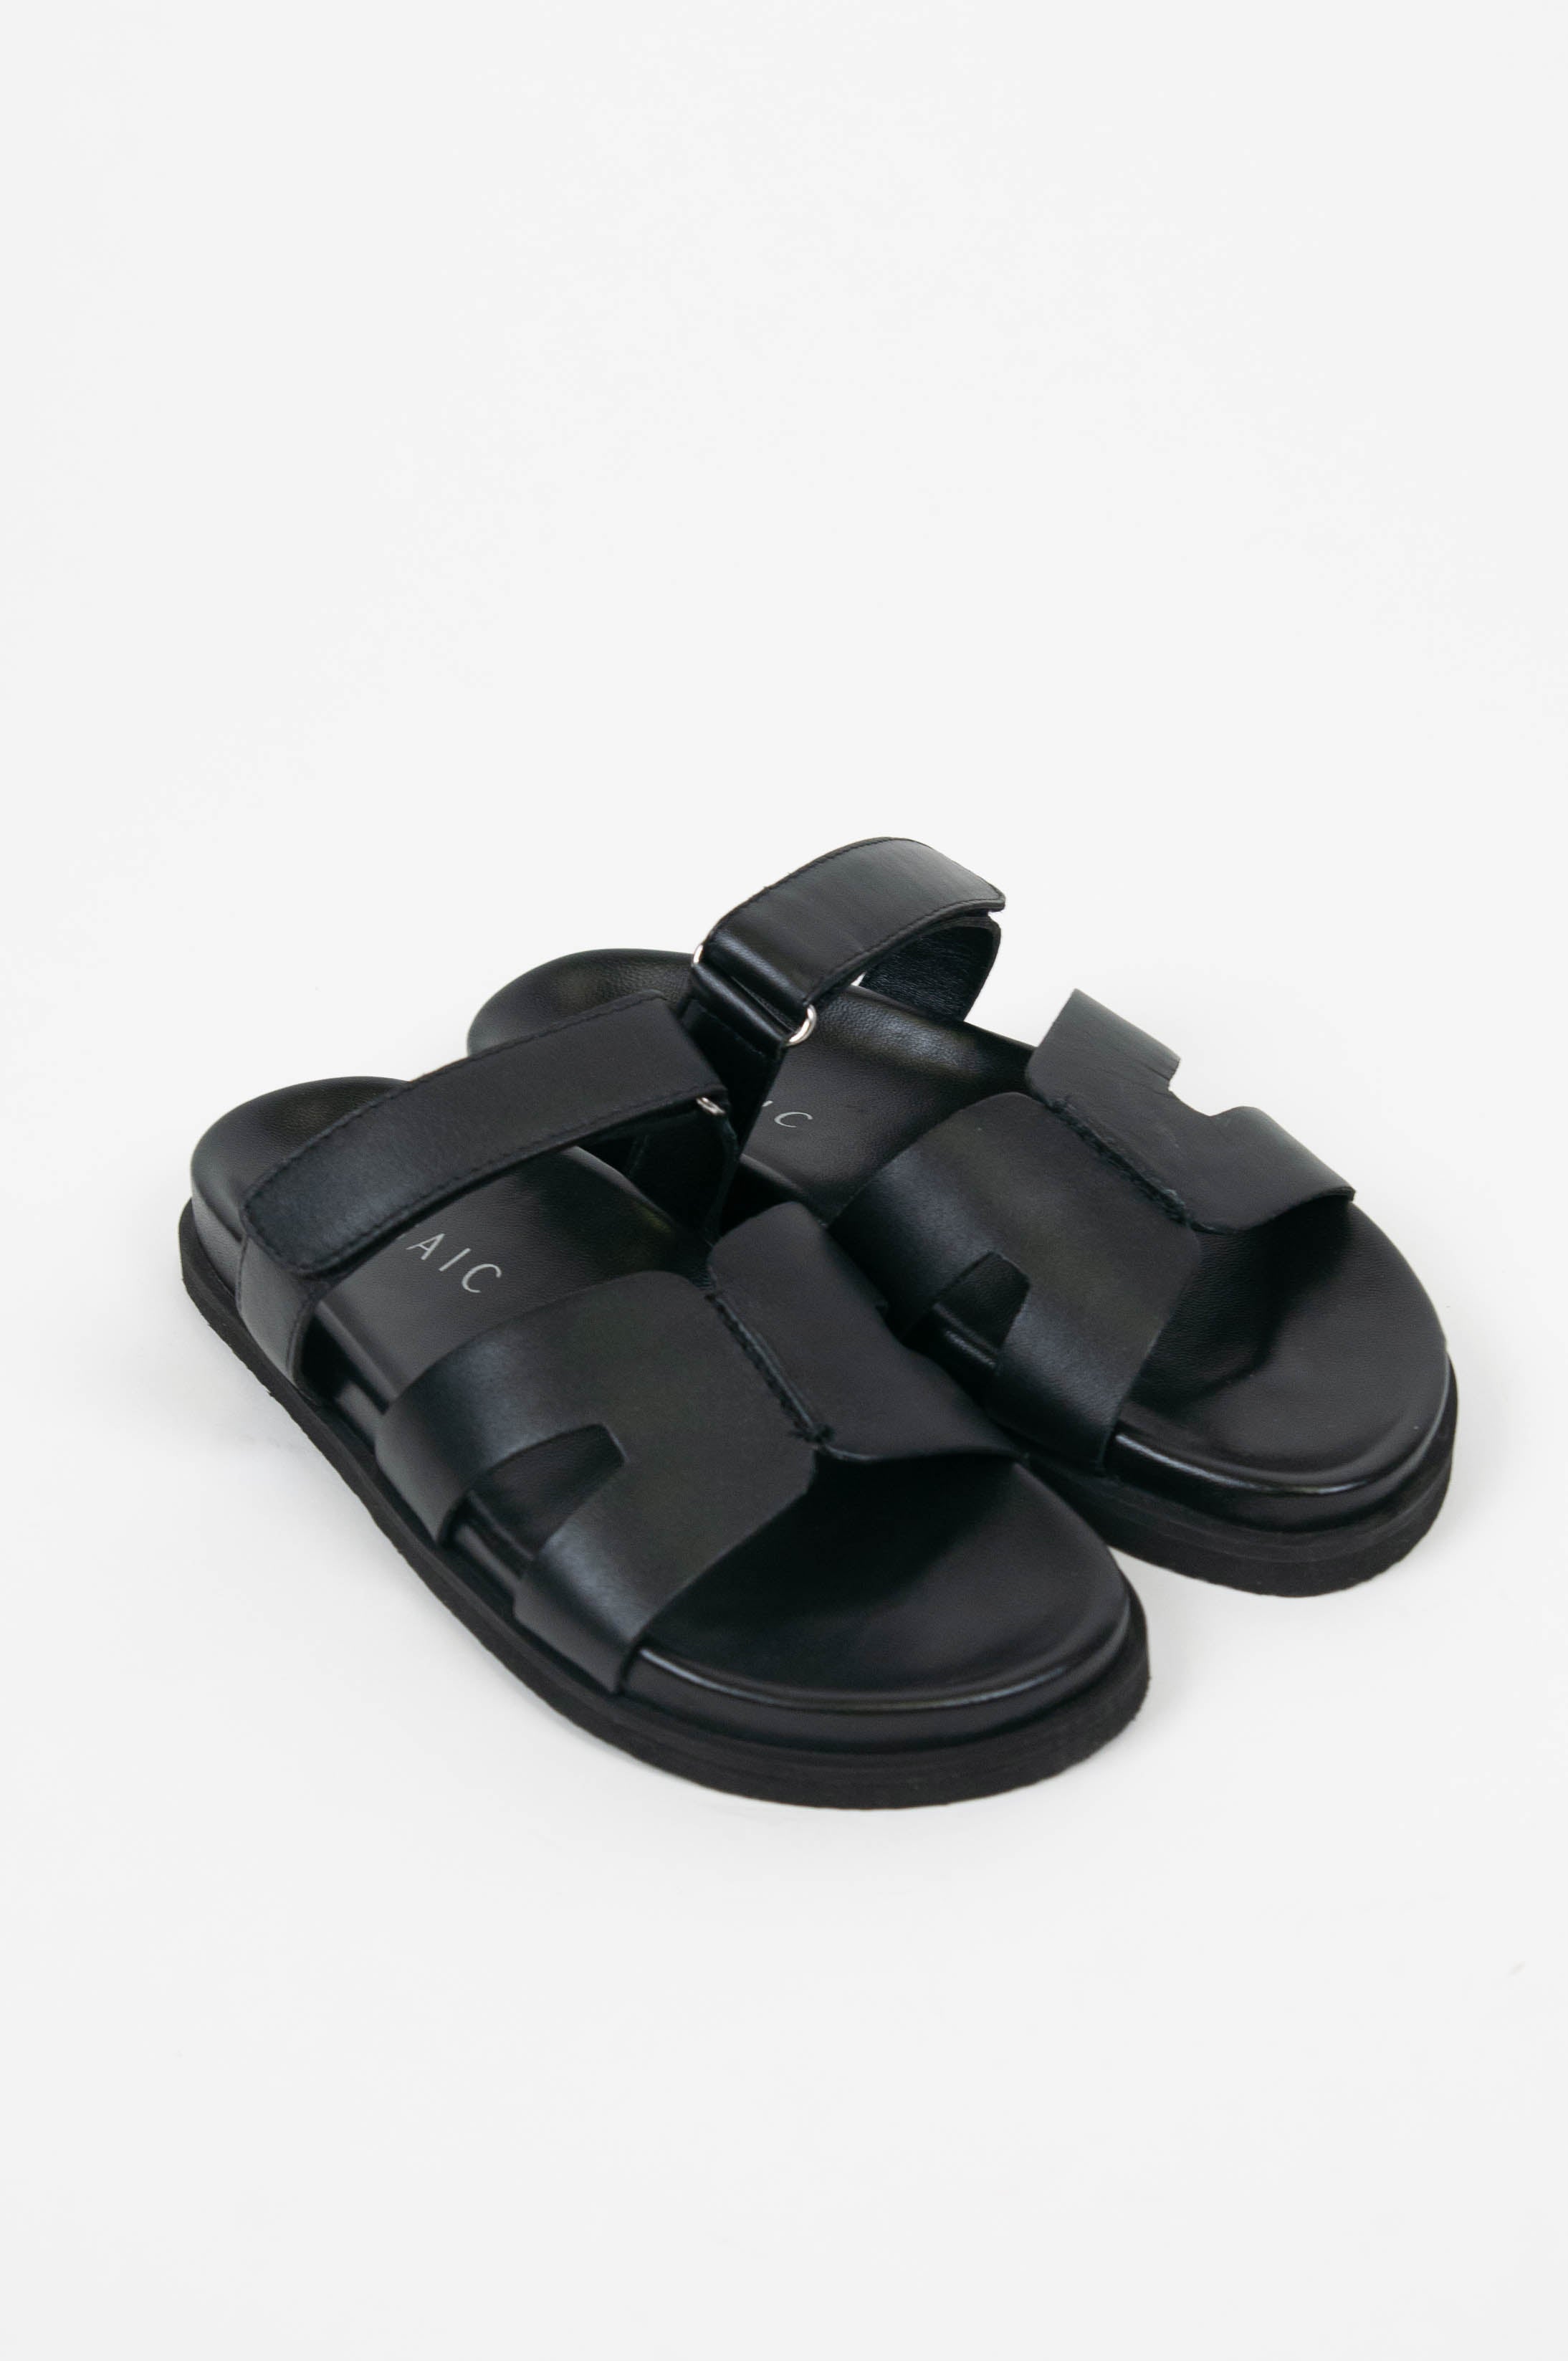 Mosaic - Leather sandal with soft bands